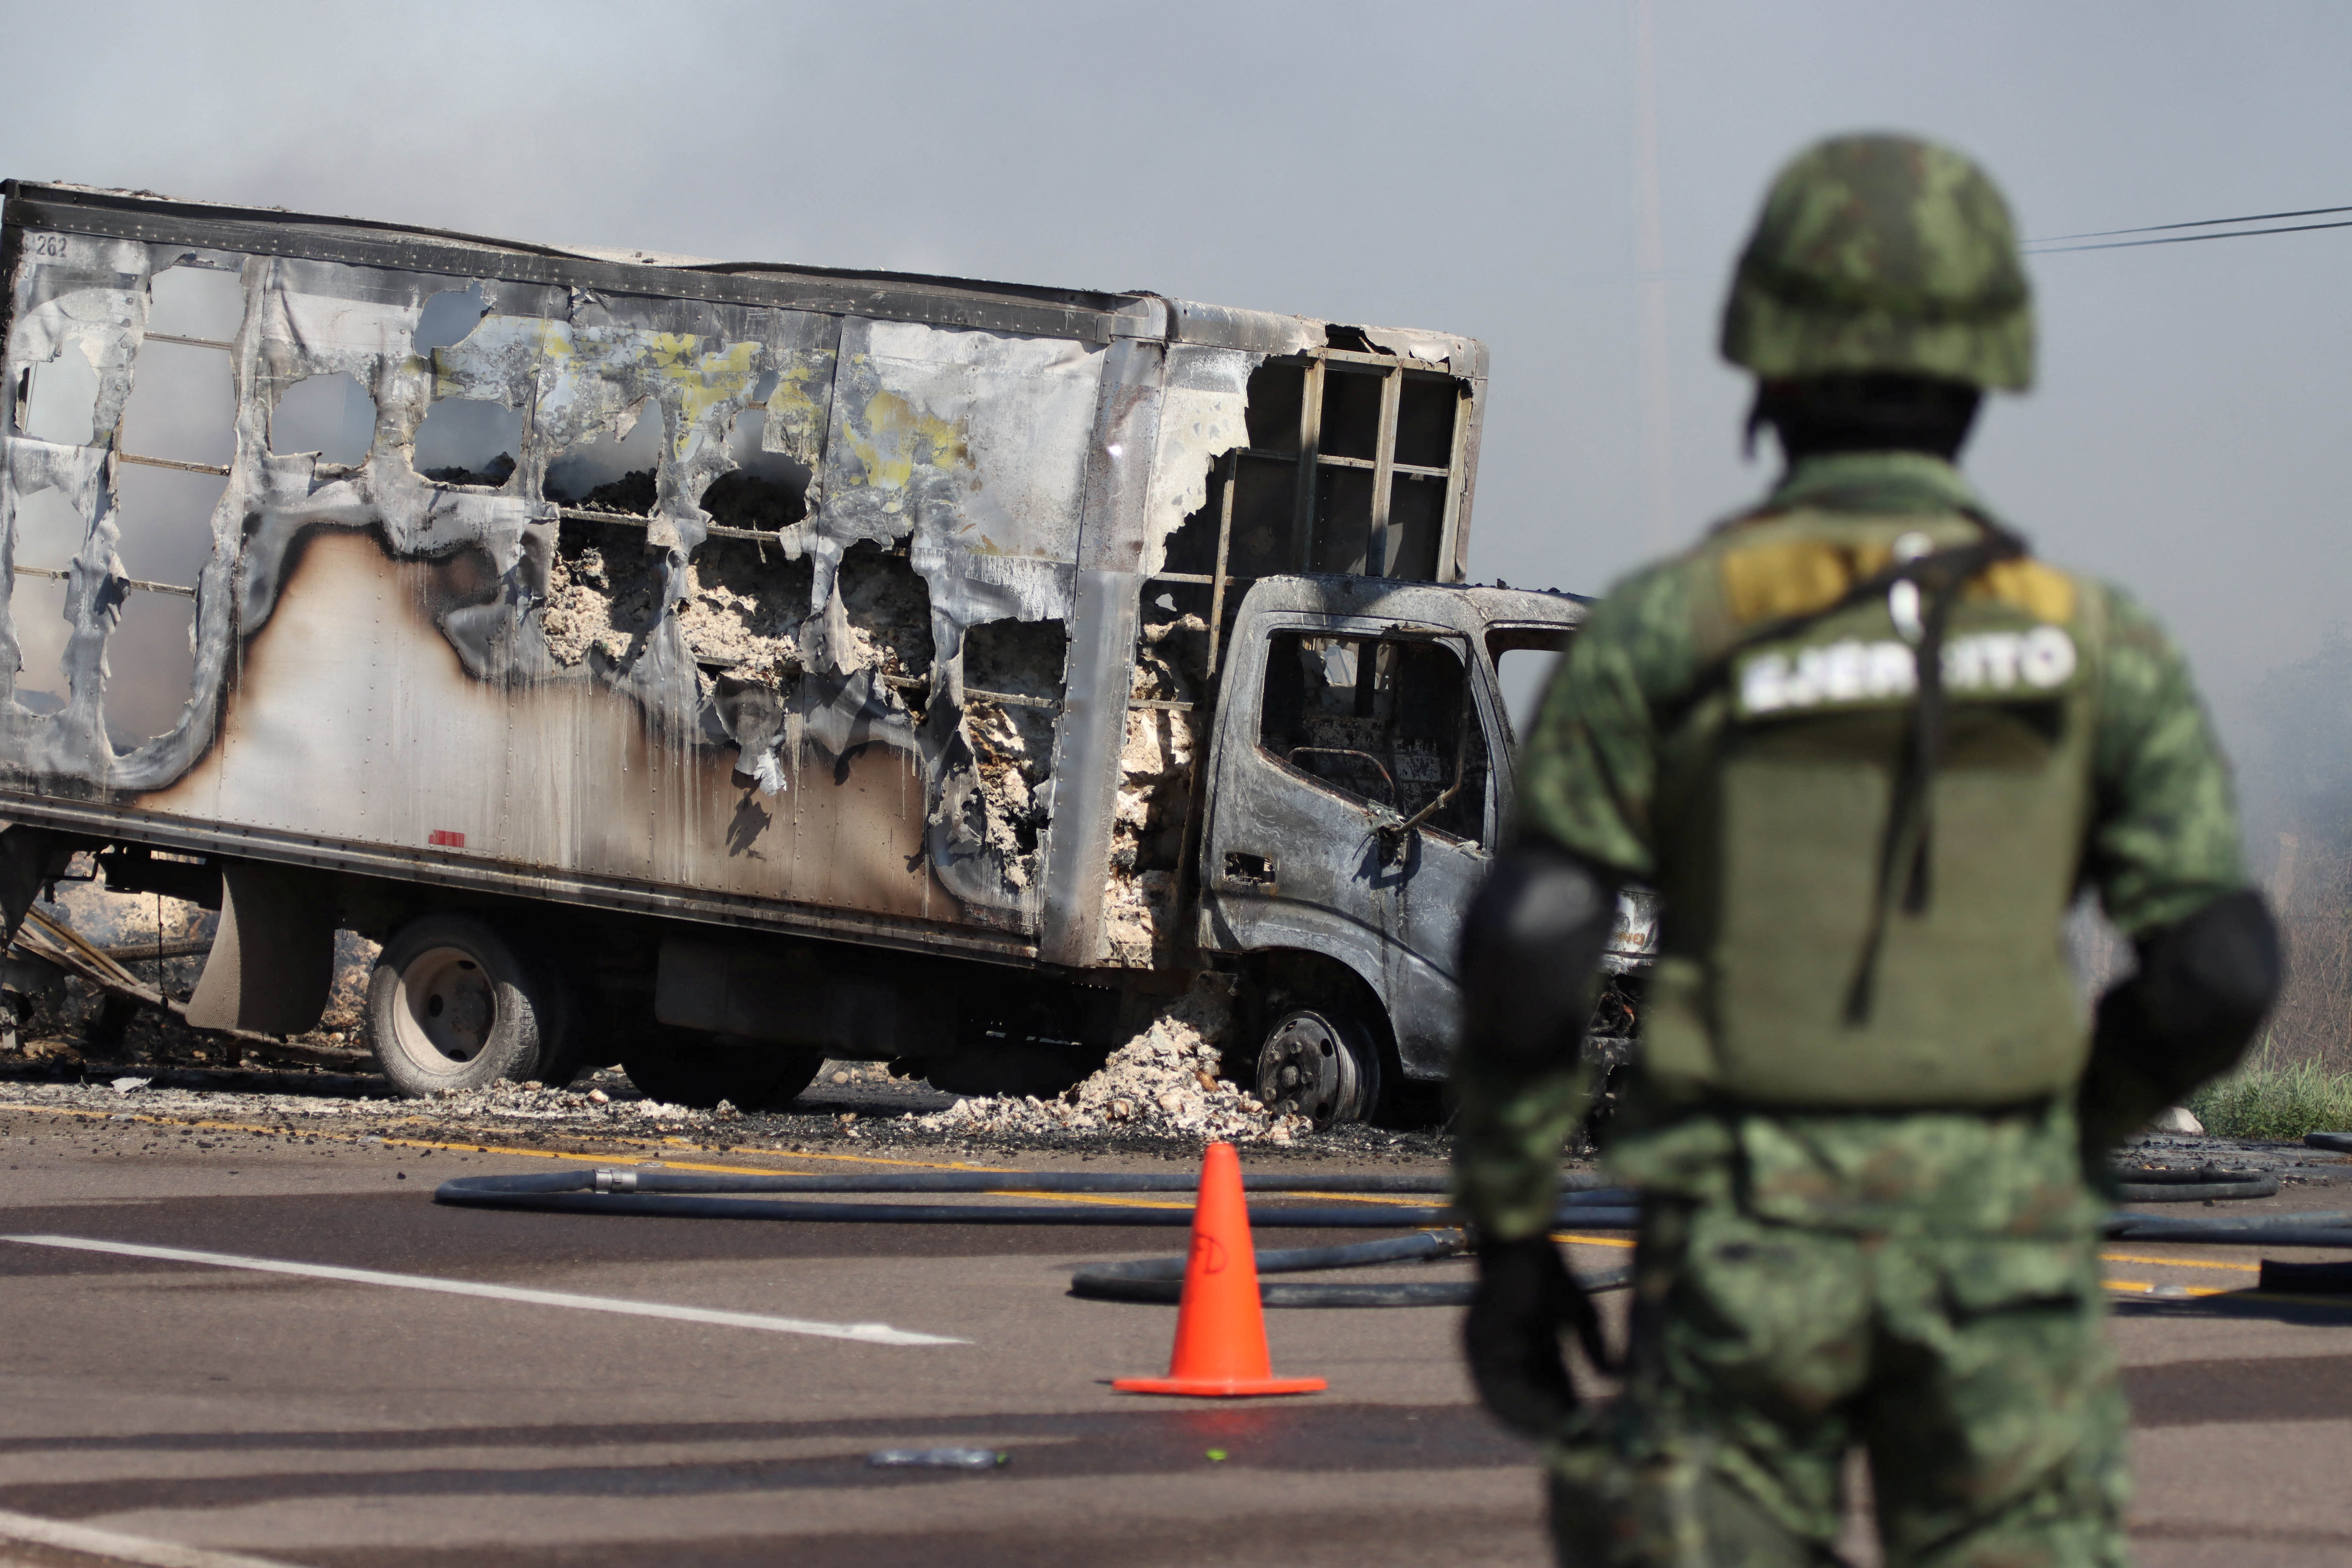 A soldier keeps watch near the wreckage of a burnt vehicle set on fire by members of a drug gang as a barricade, following the arrest by Mexican authorities of drug gang leader Ovidio Guzman in Culiacan, a son of incarcerated kingpin Joaquin "El Chapo" Guzman, in Mazatlan, Mexico, January 5, 2023. REUTERS/Stringer NO RESALE.  DO NOT ARCHIVE